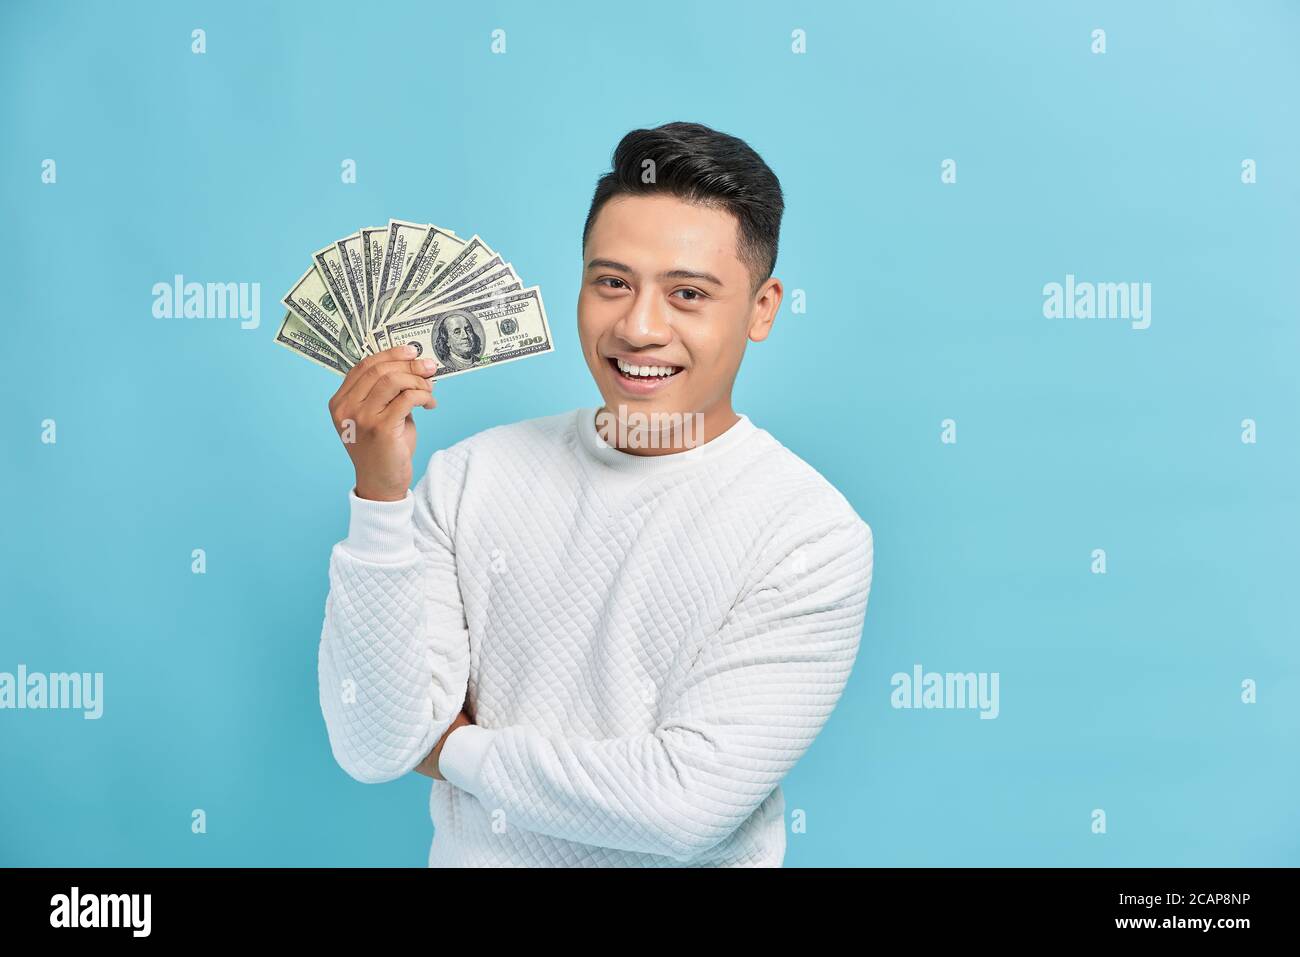 Man holding money and white arrow over blue background Stock Photo